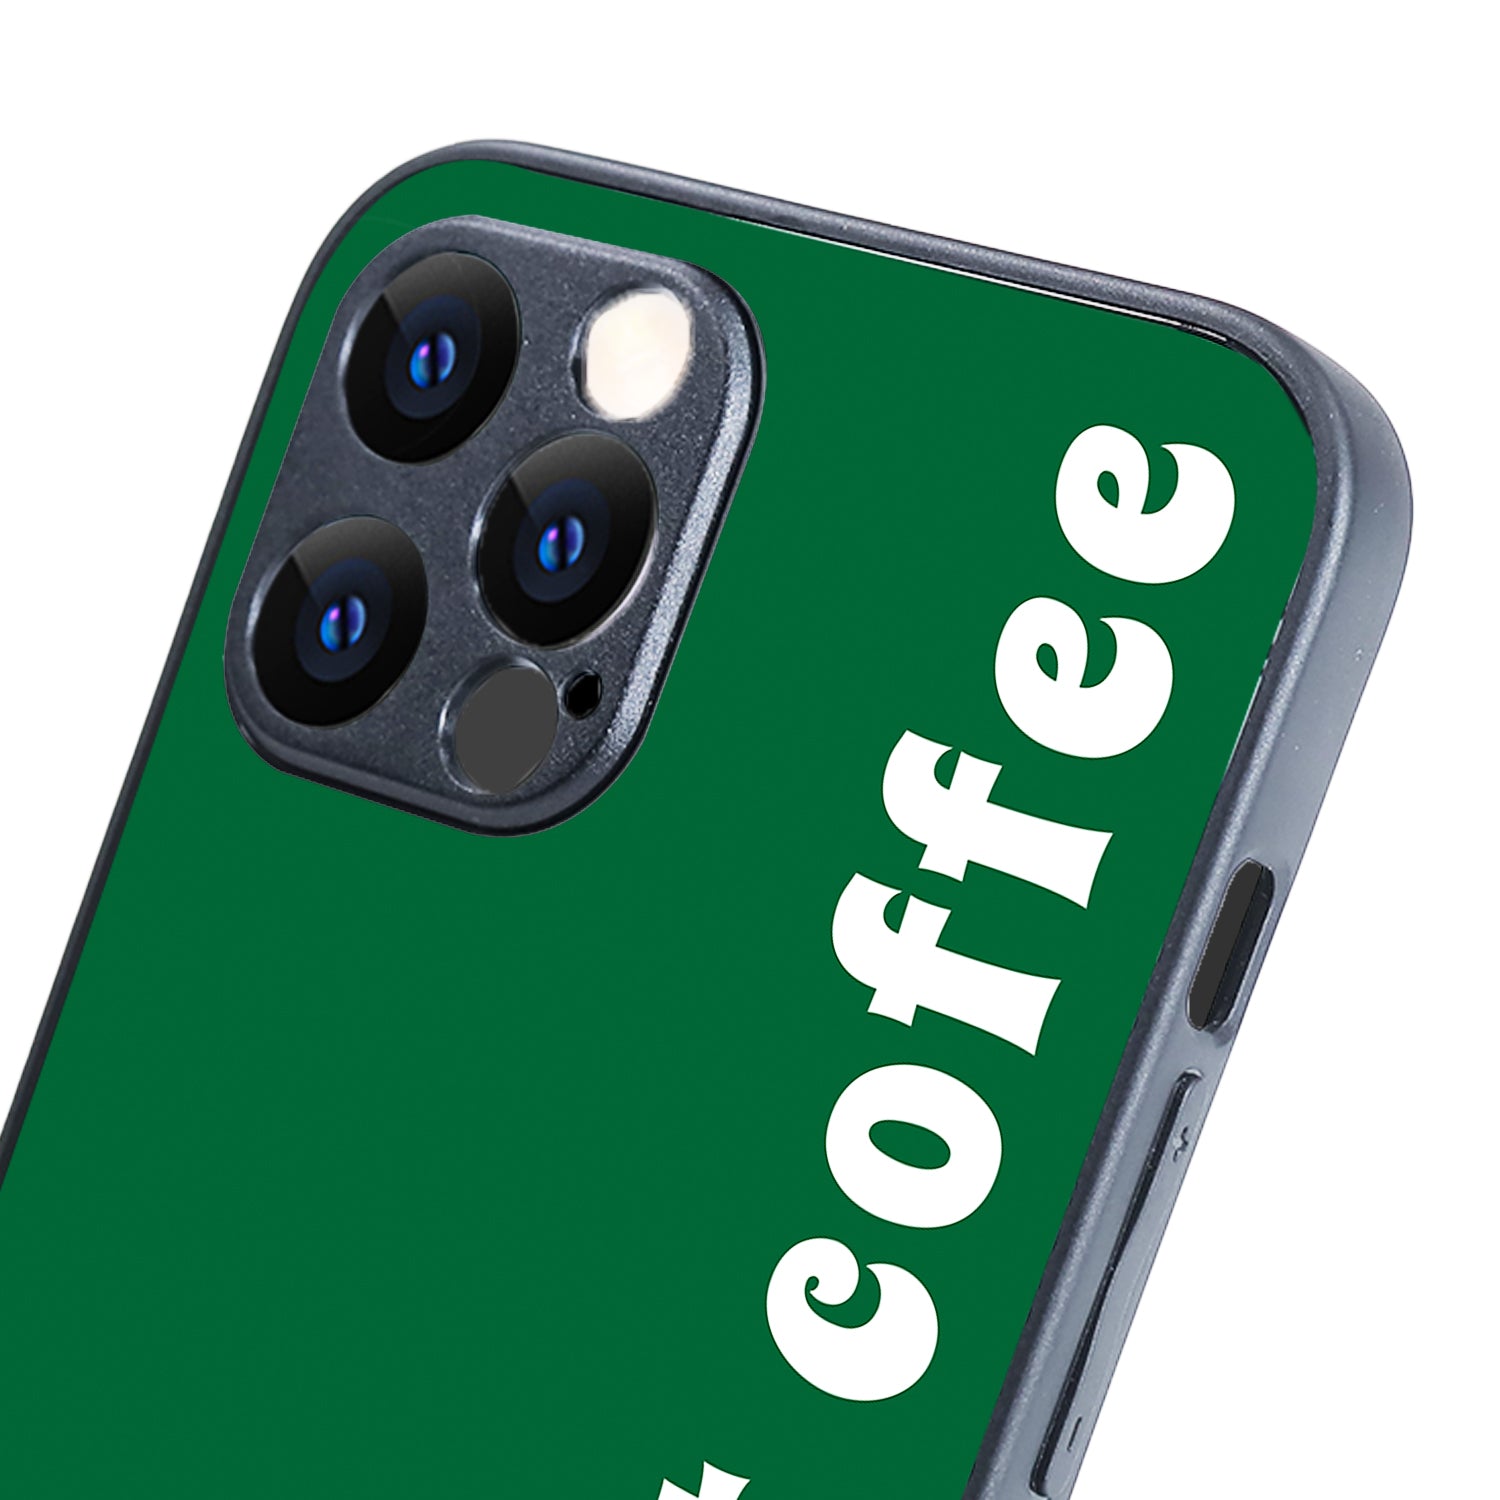 First Coffee Motivational Quotes iPhone 12 Pro Max Case